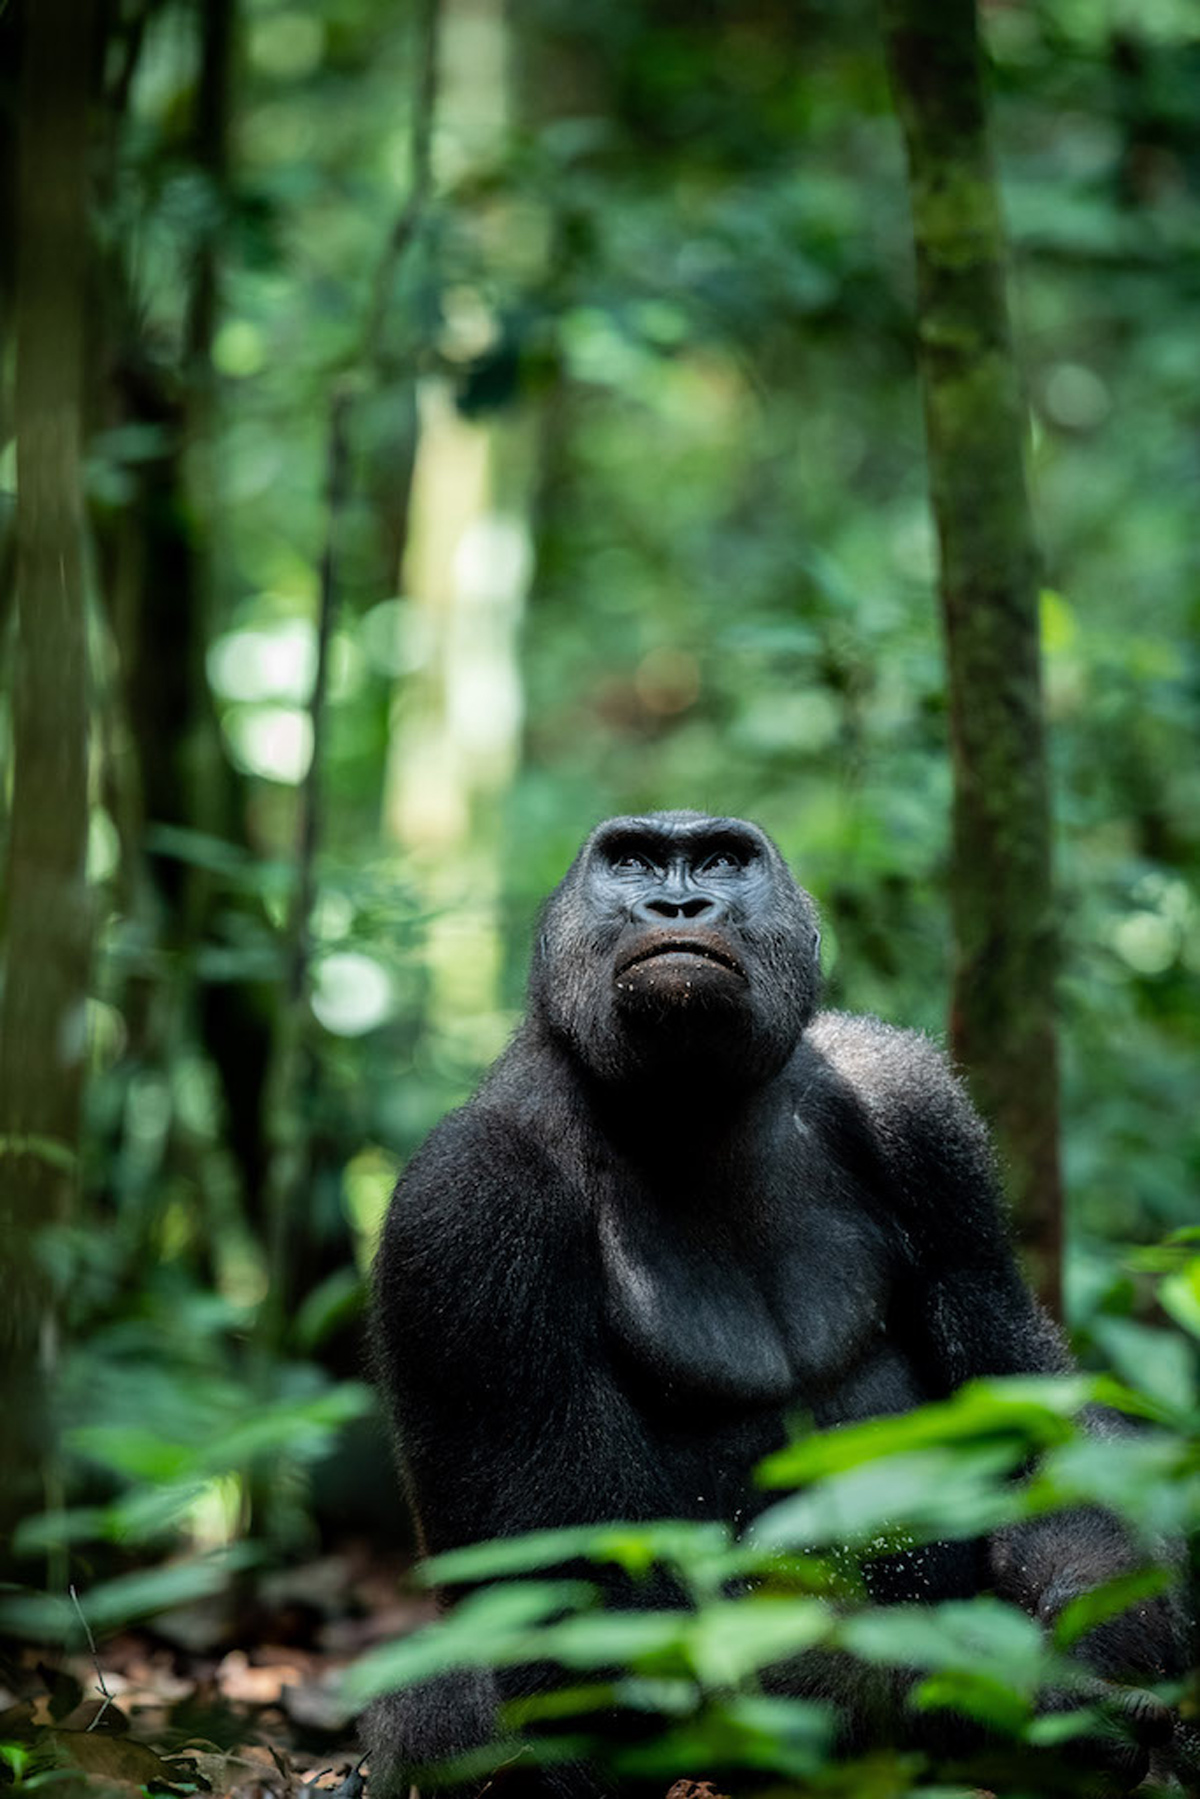 A lowland gorilla looking thoughtful in Dzanga-Sangha National Park, Central African Republic © Jacha Potgieter